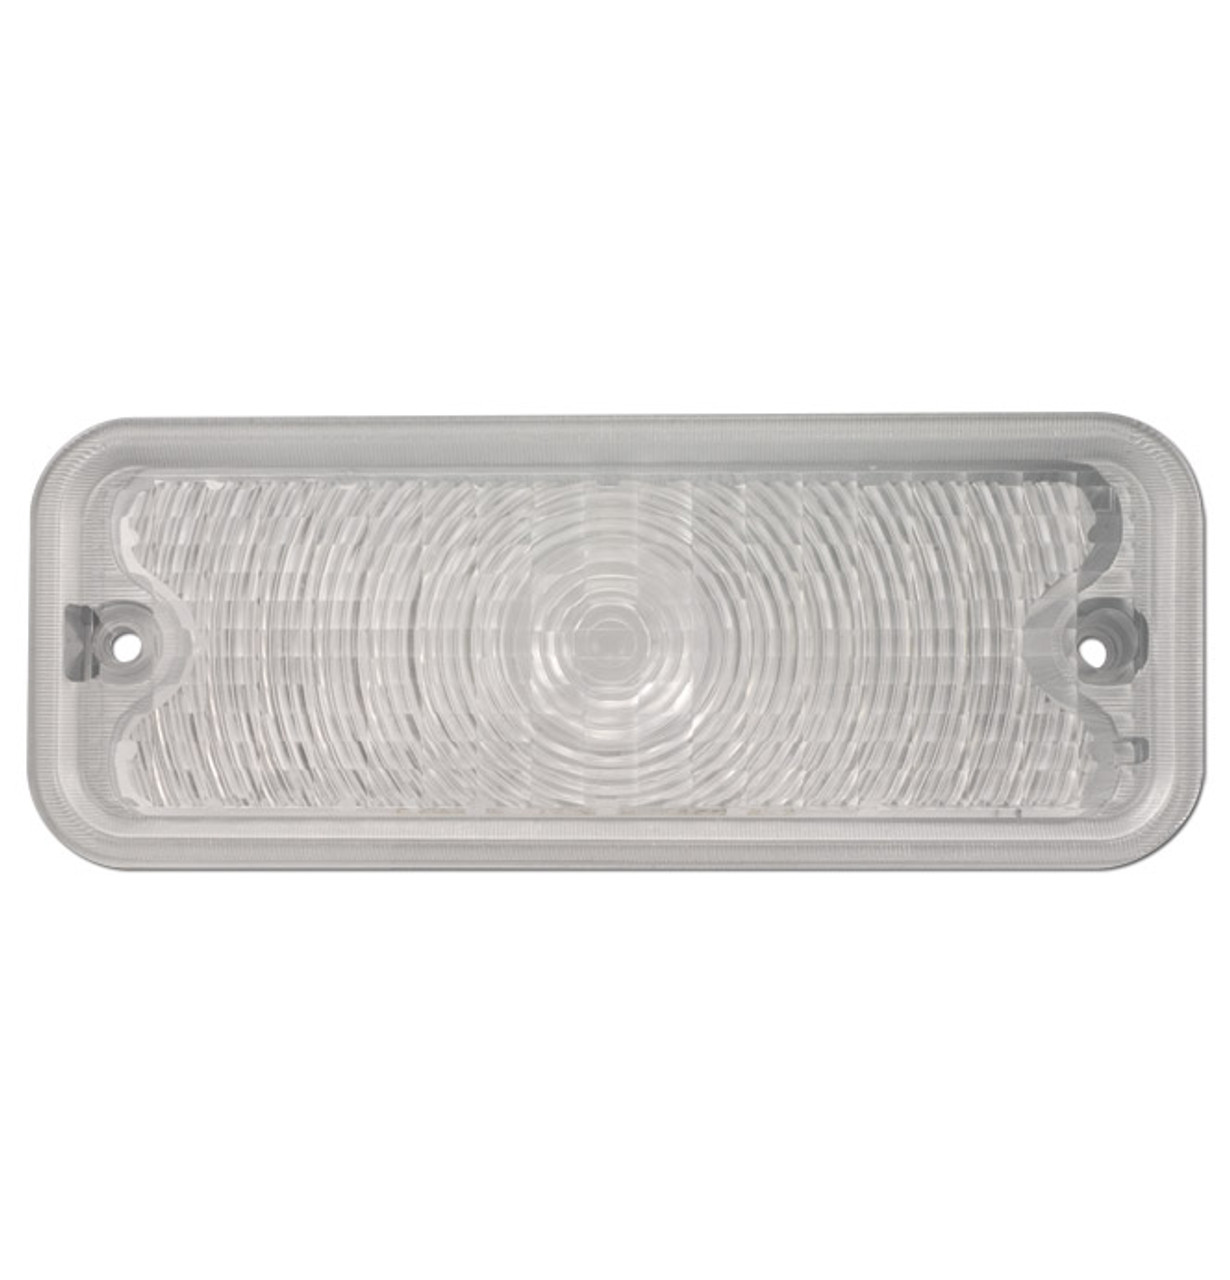 1975-1980 Chevy/GMC Truck Parklight Lens, R/H, Clear, With Diffused Silver Painted Sides